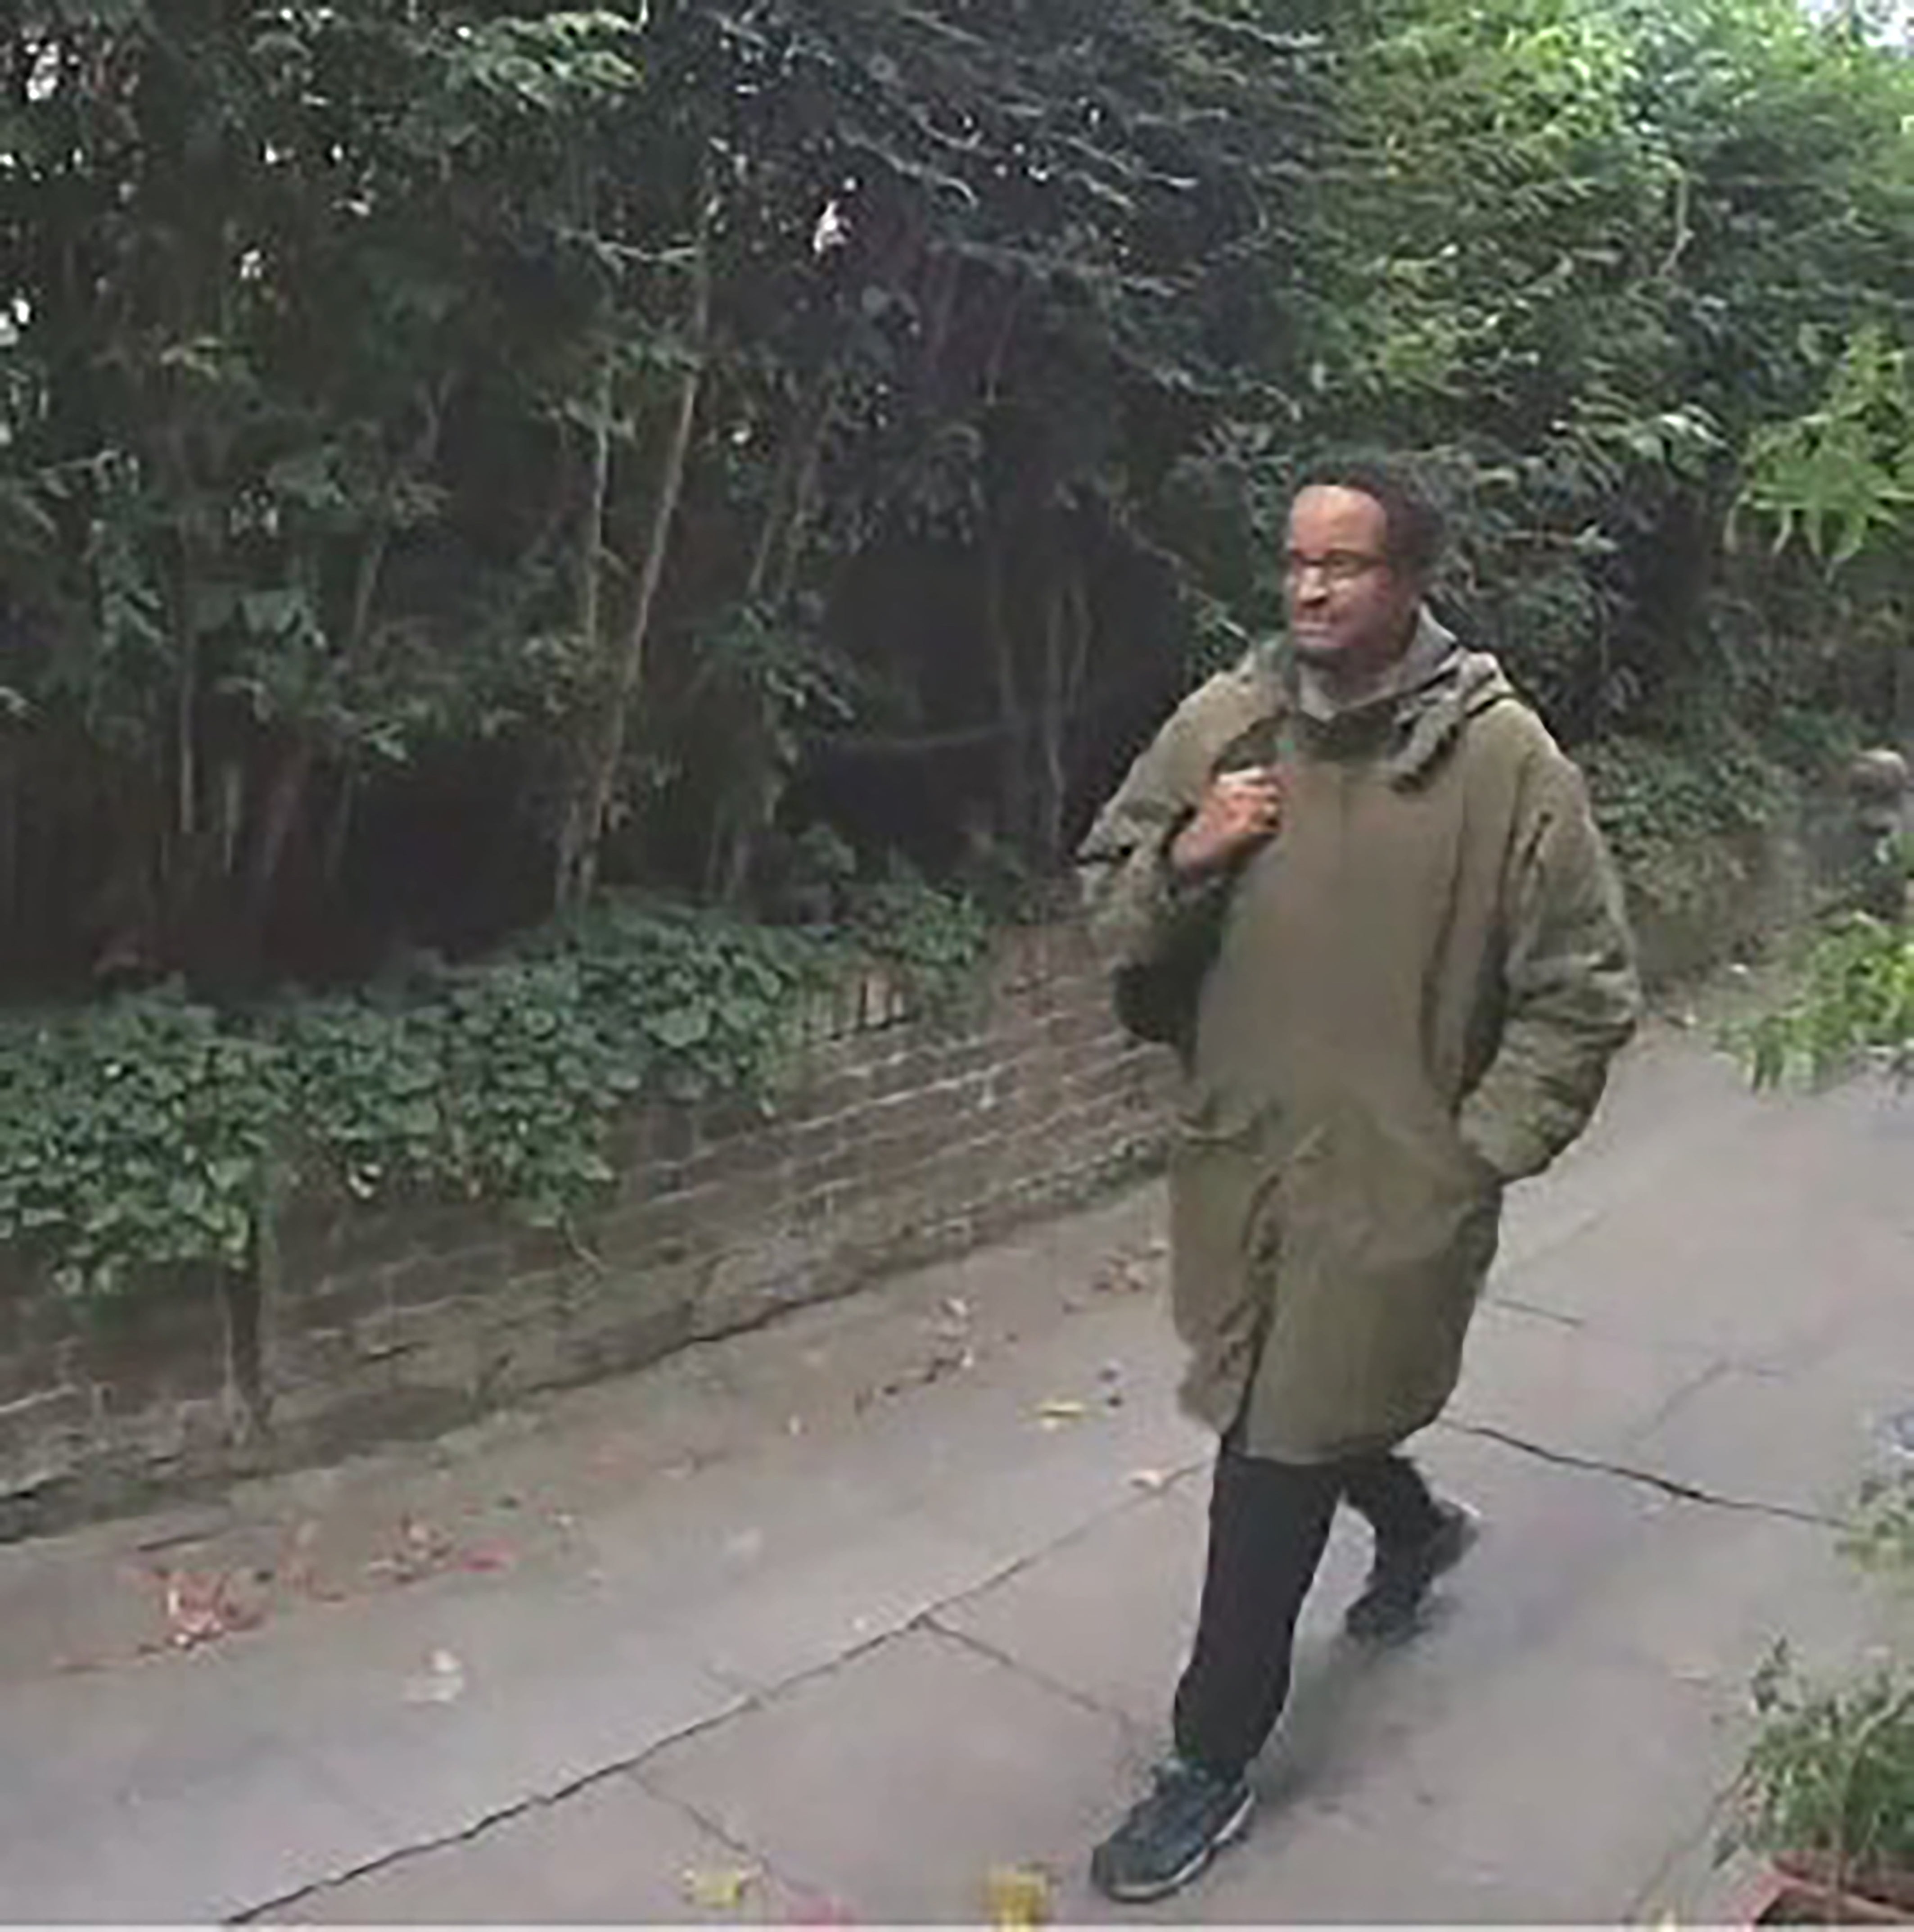 Terror suspect Ali Harbi Ali caught on CCTV making his way from his home in Kentish Town to Essex on the day he is alleged to have murdered Sir David Amess